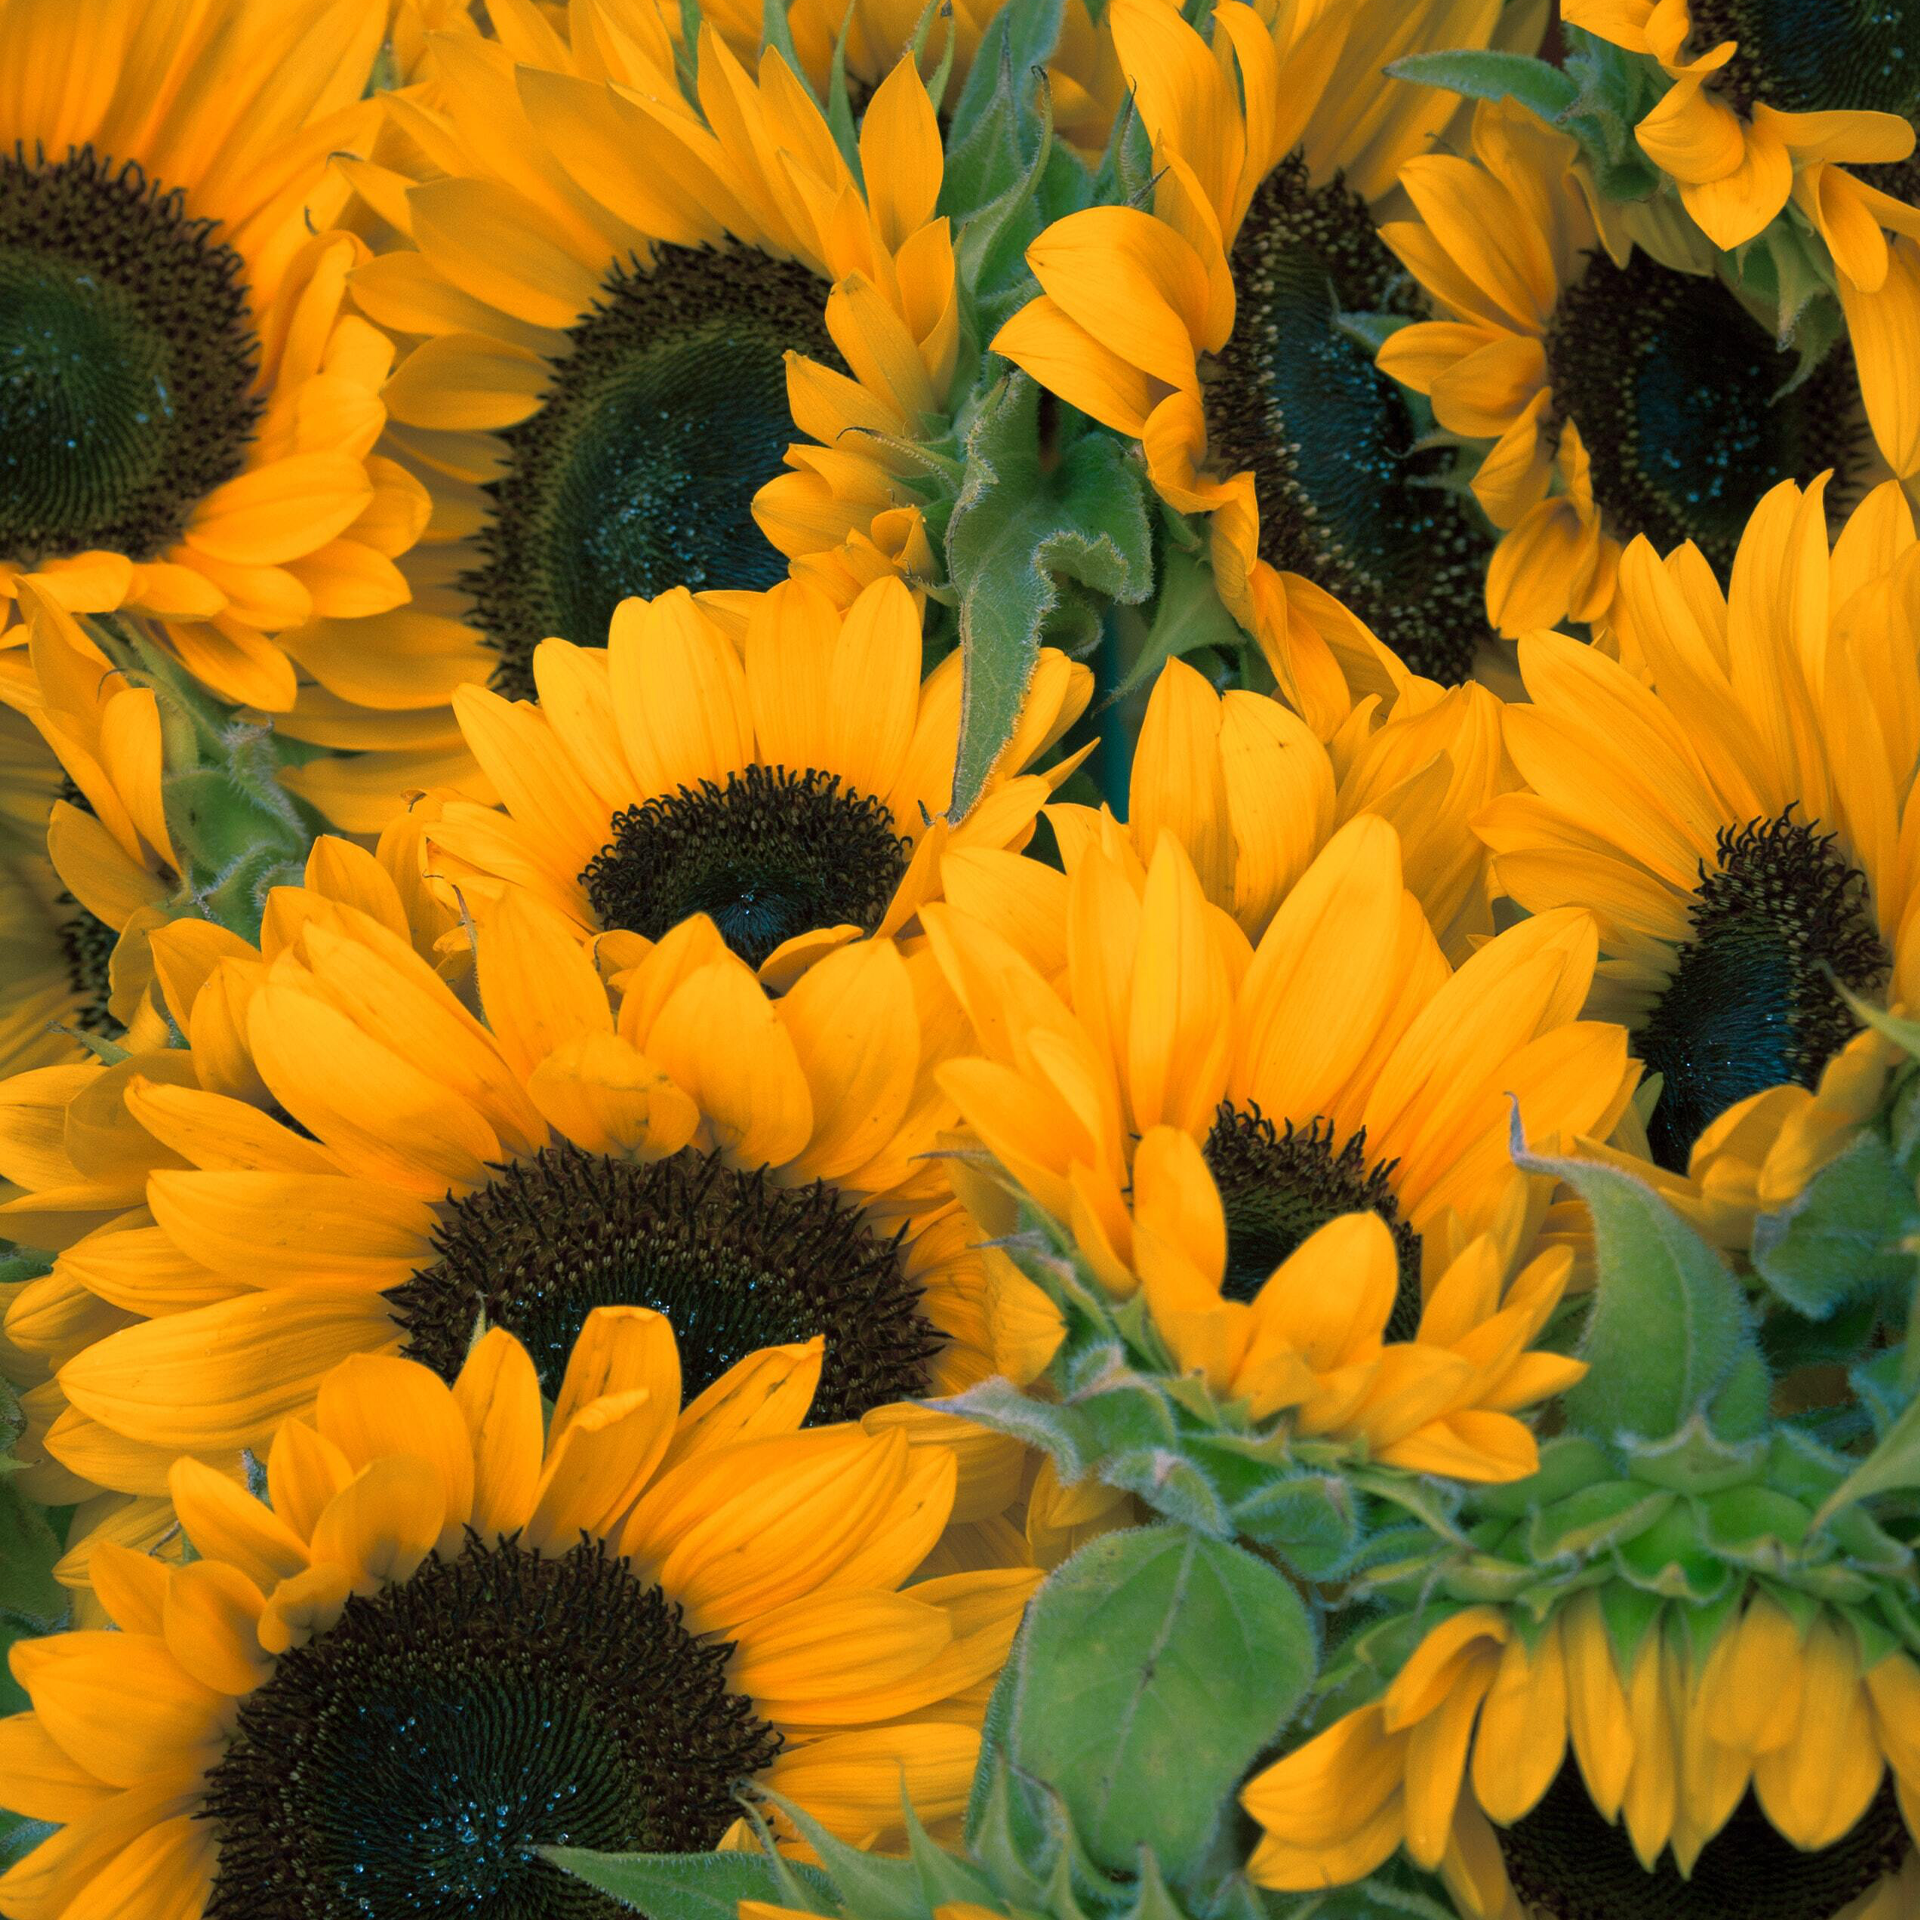 Tips To Care For Your Sunflowers